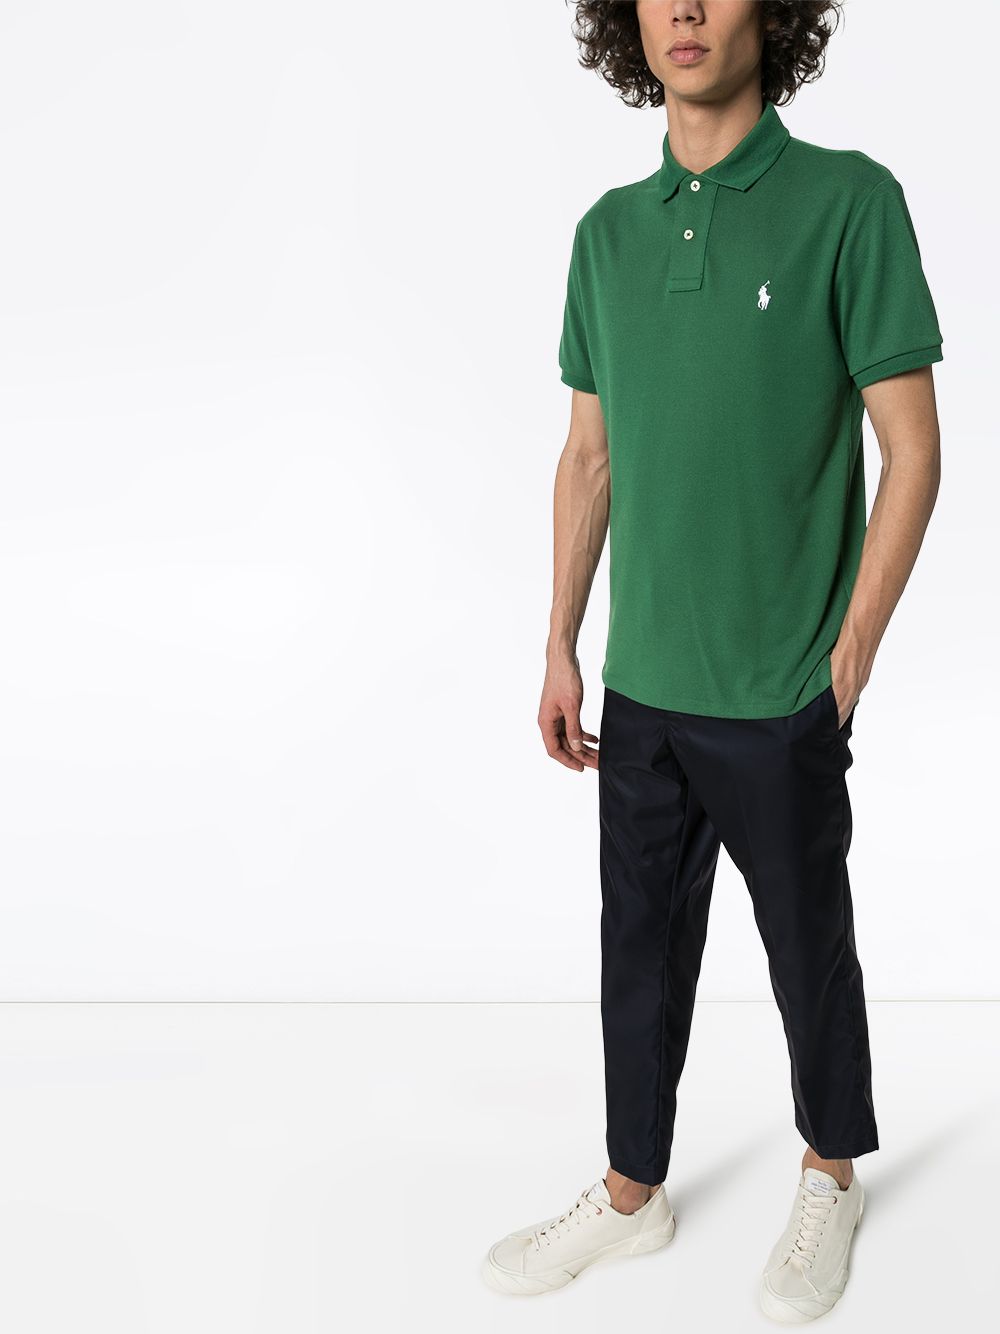 Shop Polo Ralph Lauren Earth recycled polo shirt with Express Delivery ...